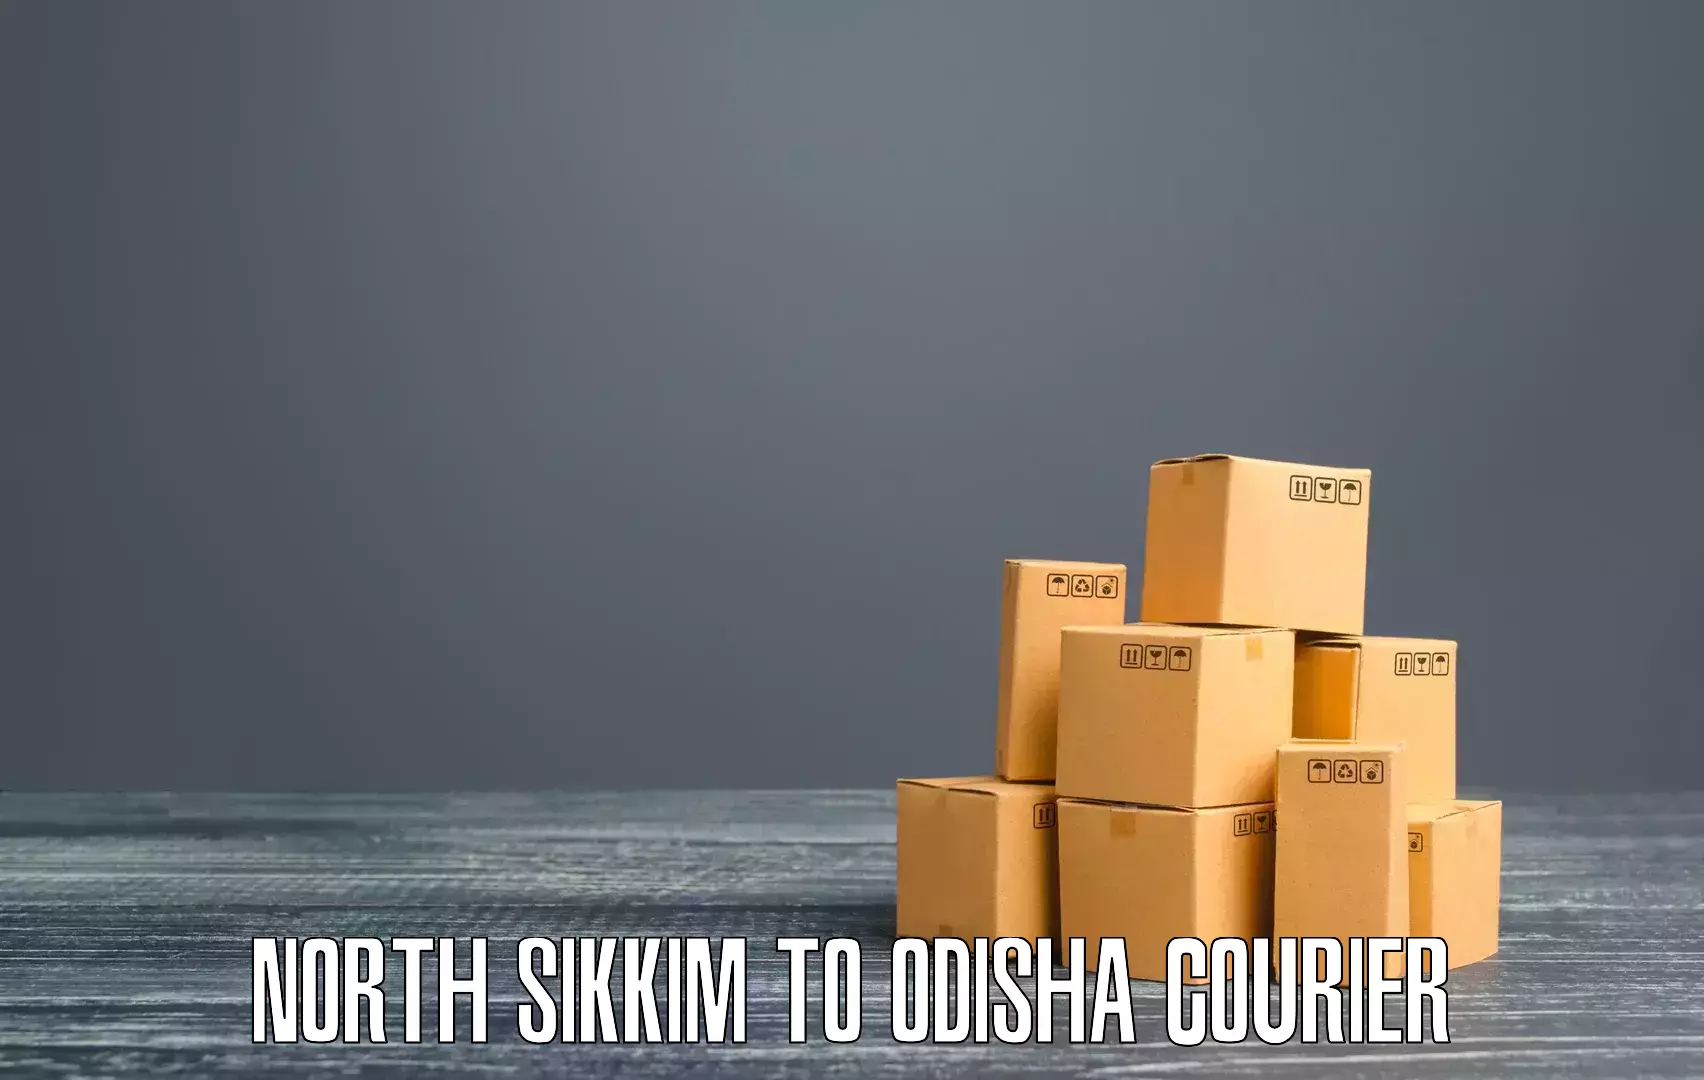 Courier service comparison North Sikkim to Asika